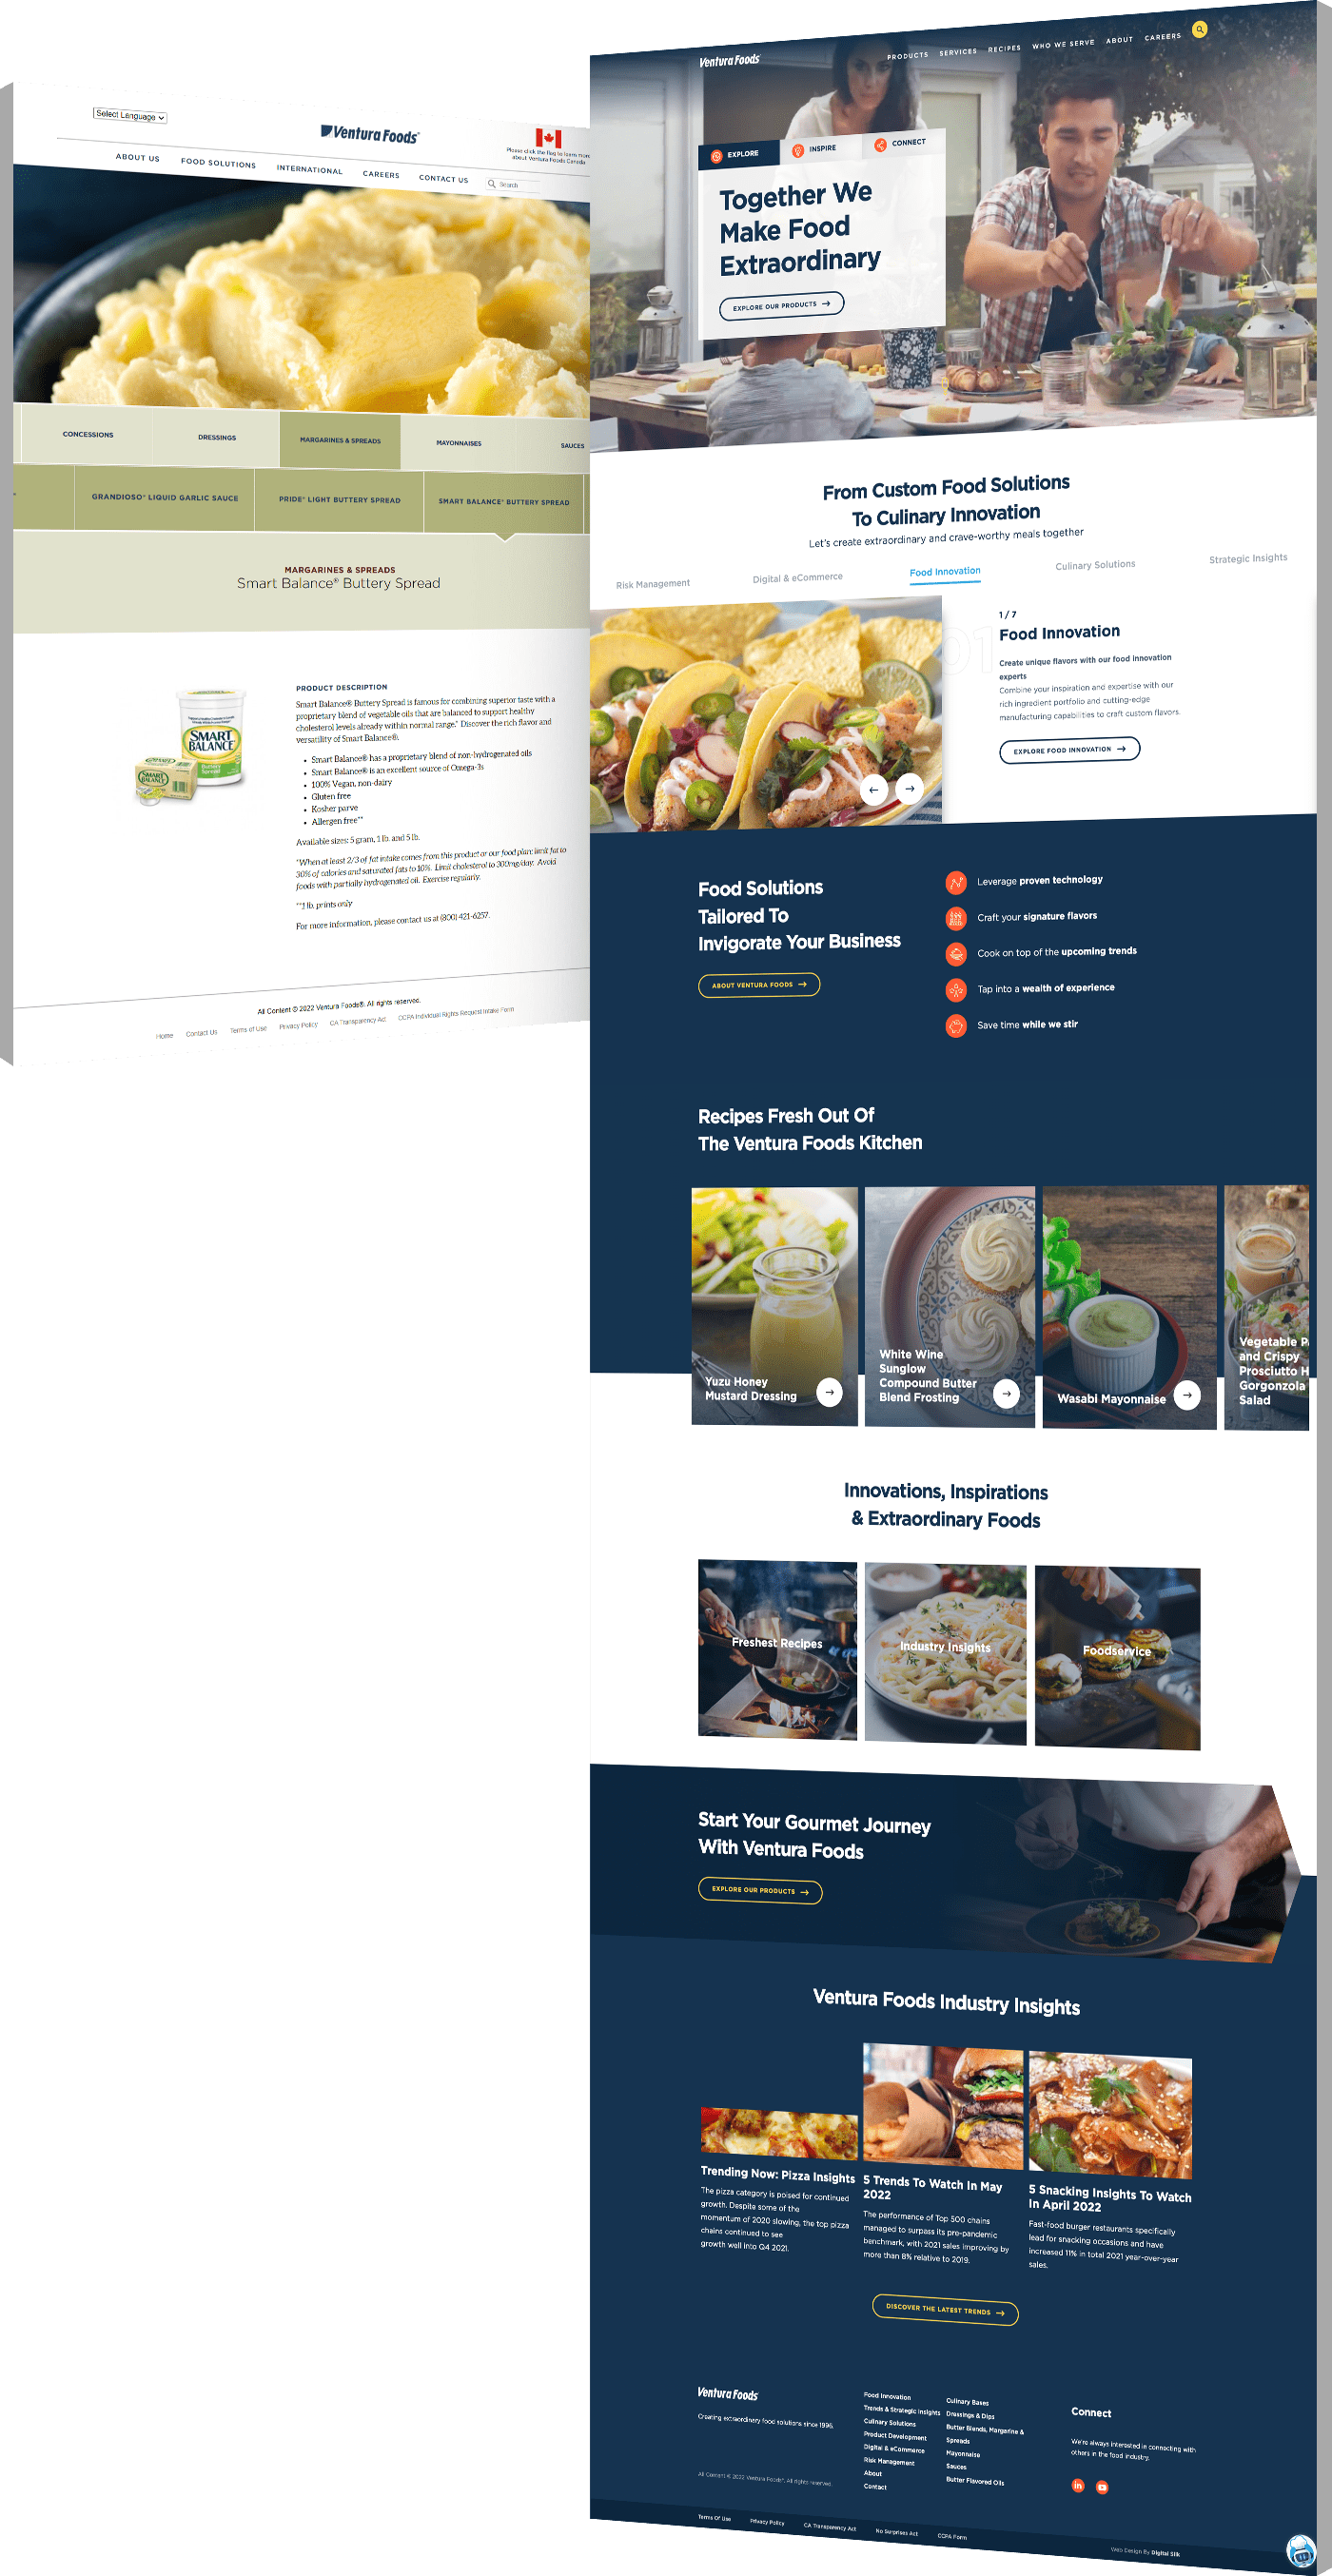 Screenshots showing Ventura Foods' website before and after our redesign